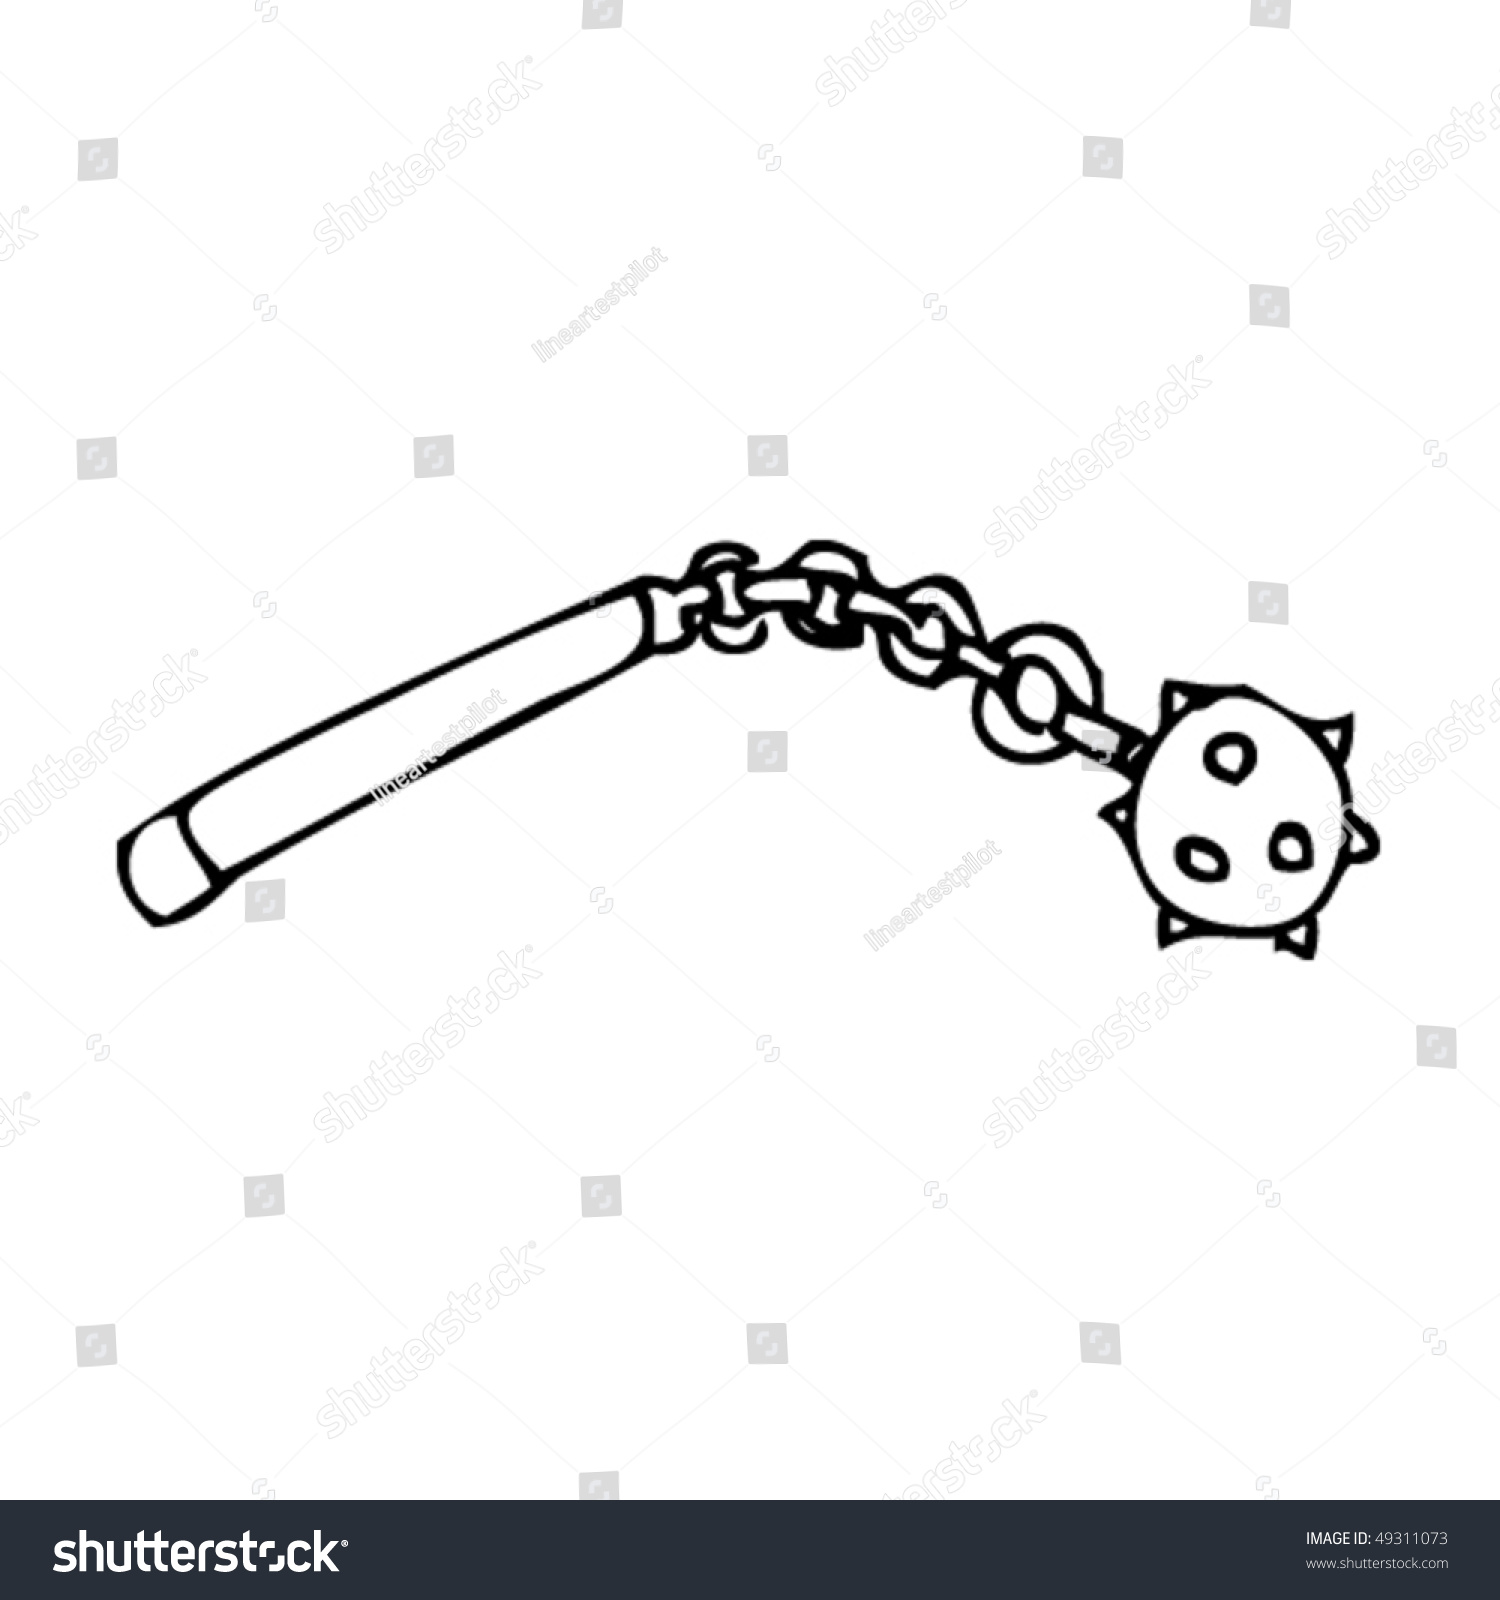 Quirky Drawing Of A Mace Stock Vector Illustration 49311073 : Shutterstock